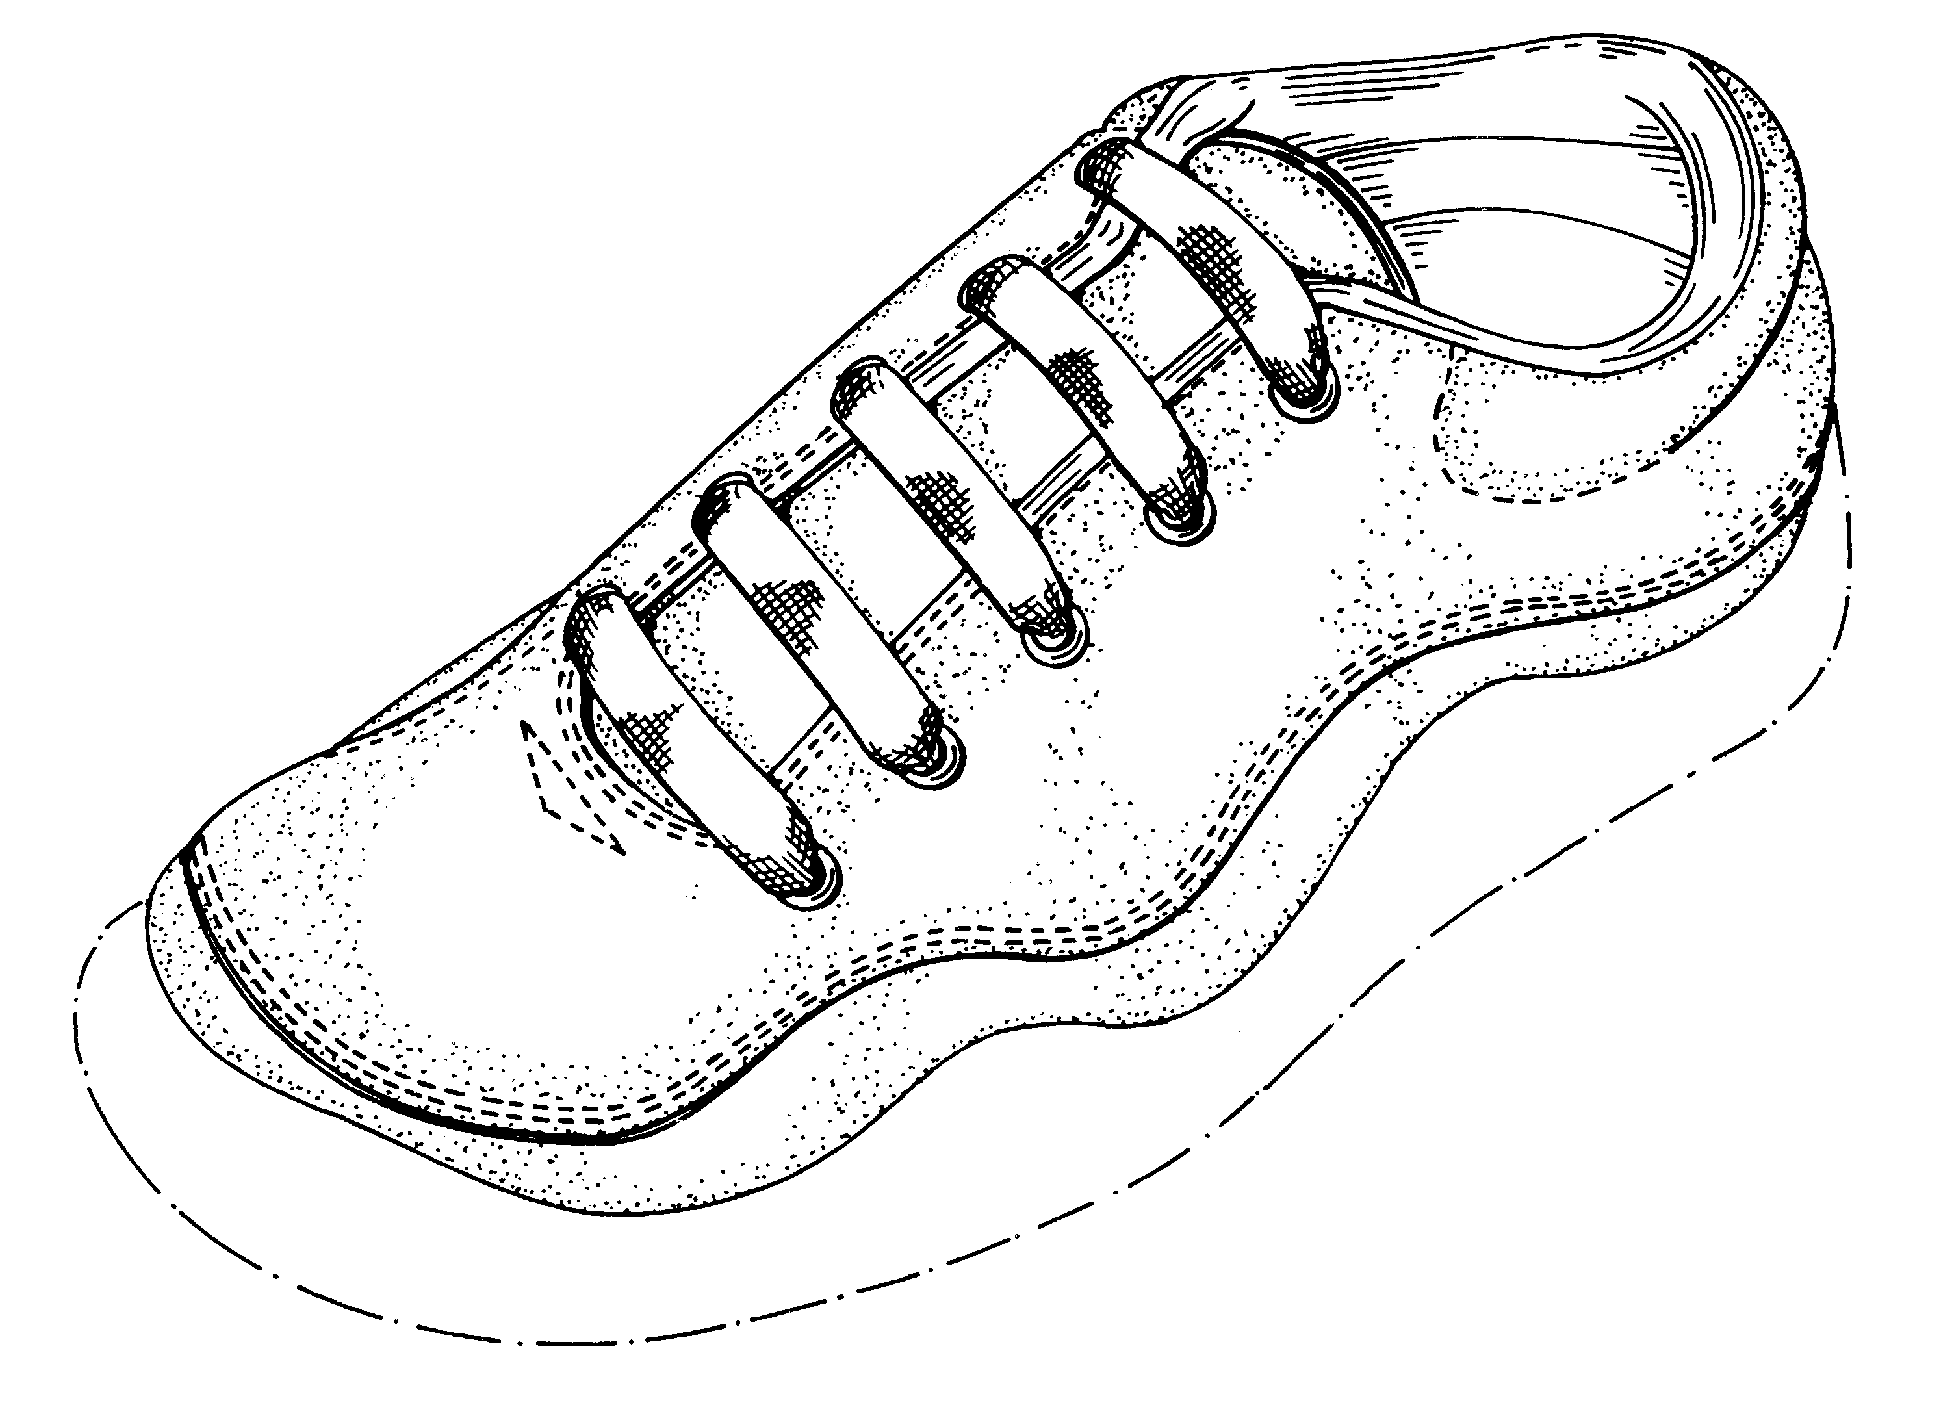 A typical example of a shoe upper.
